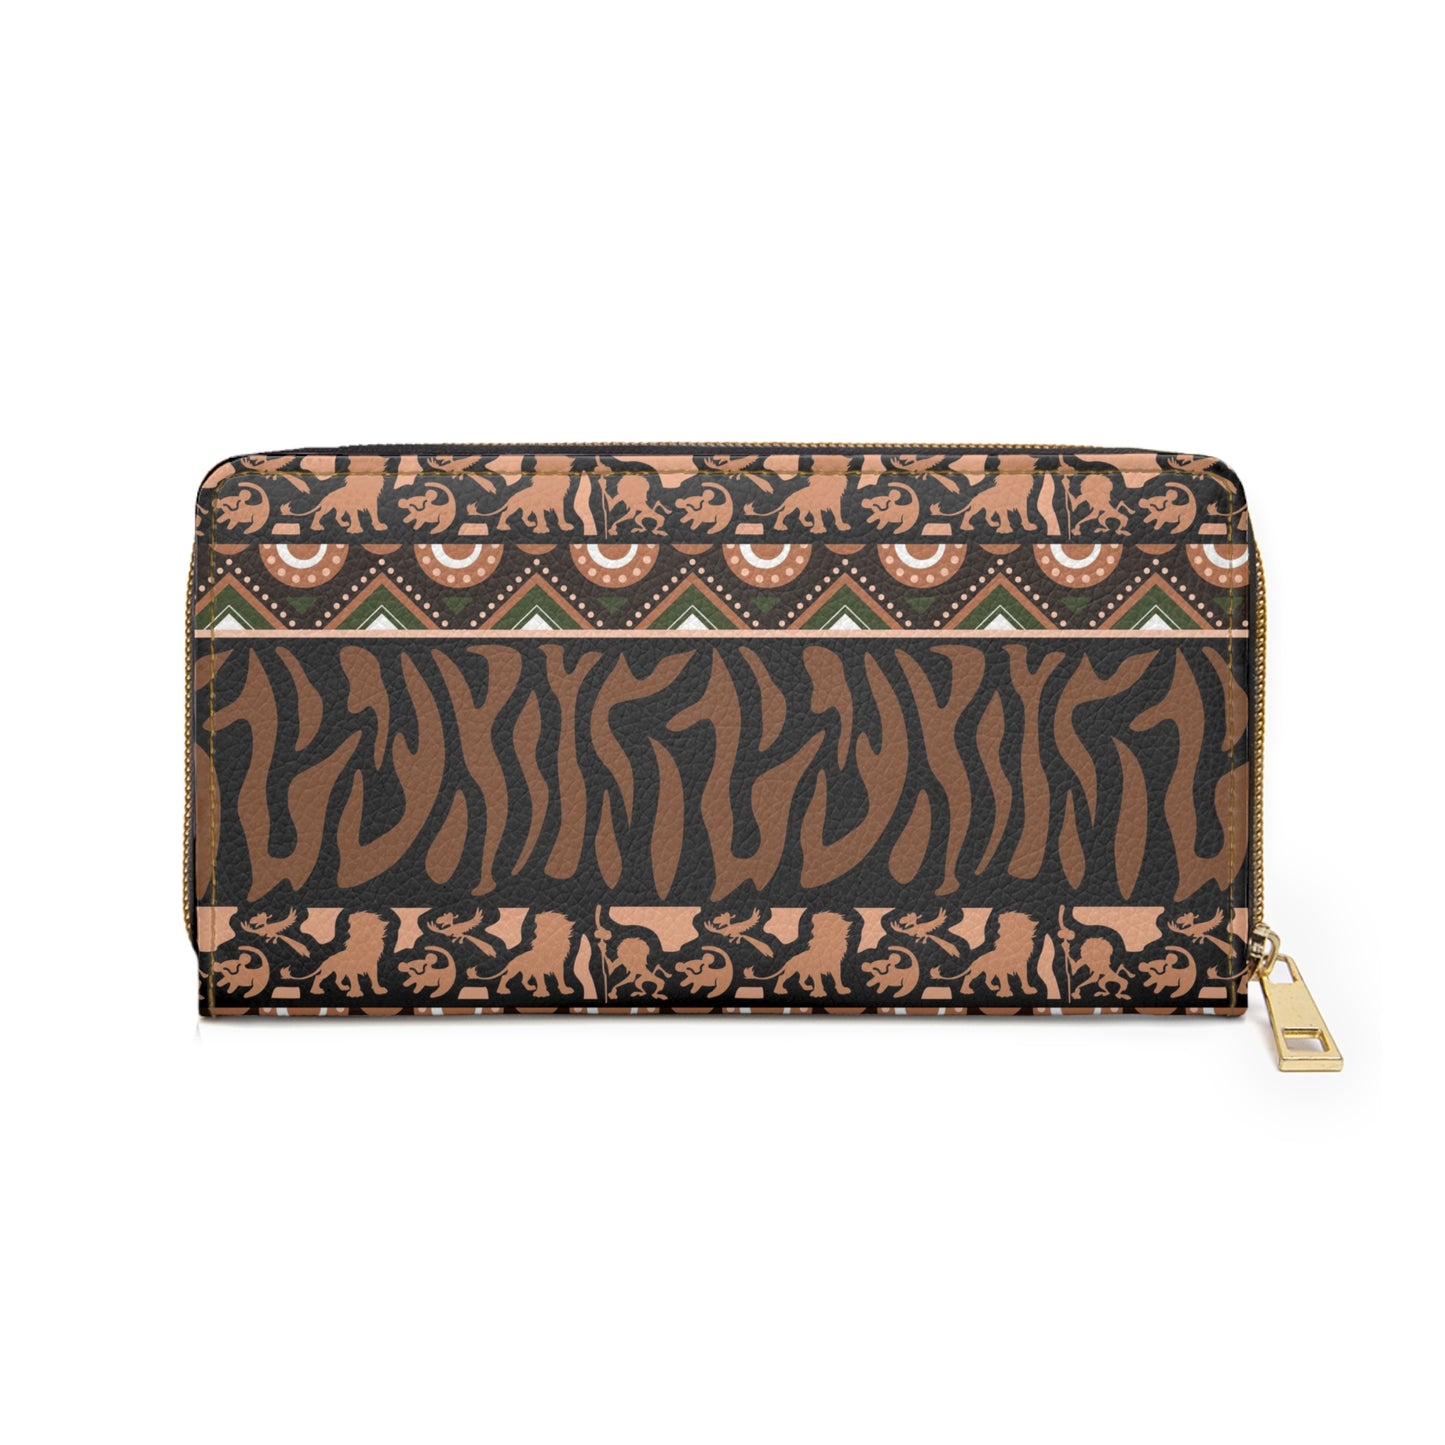 Everything The Sun Touches Zipper Wallet